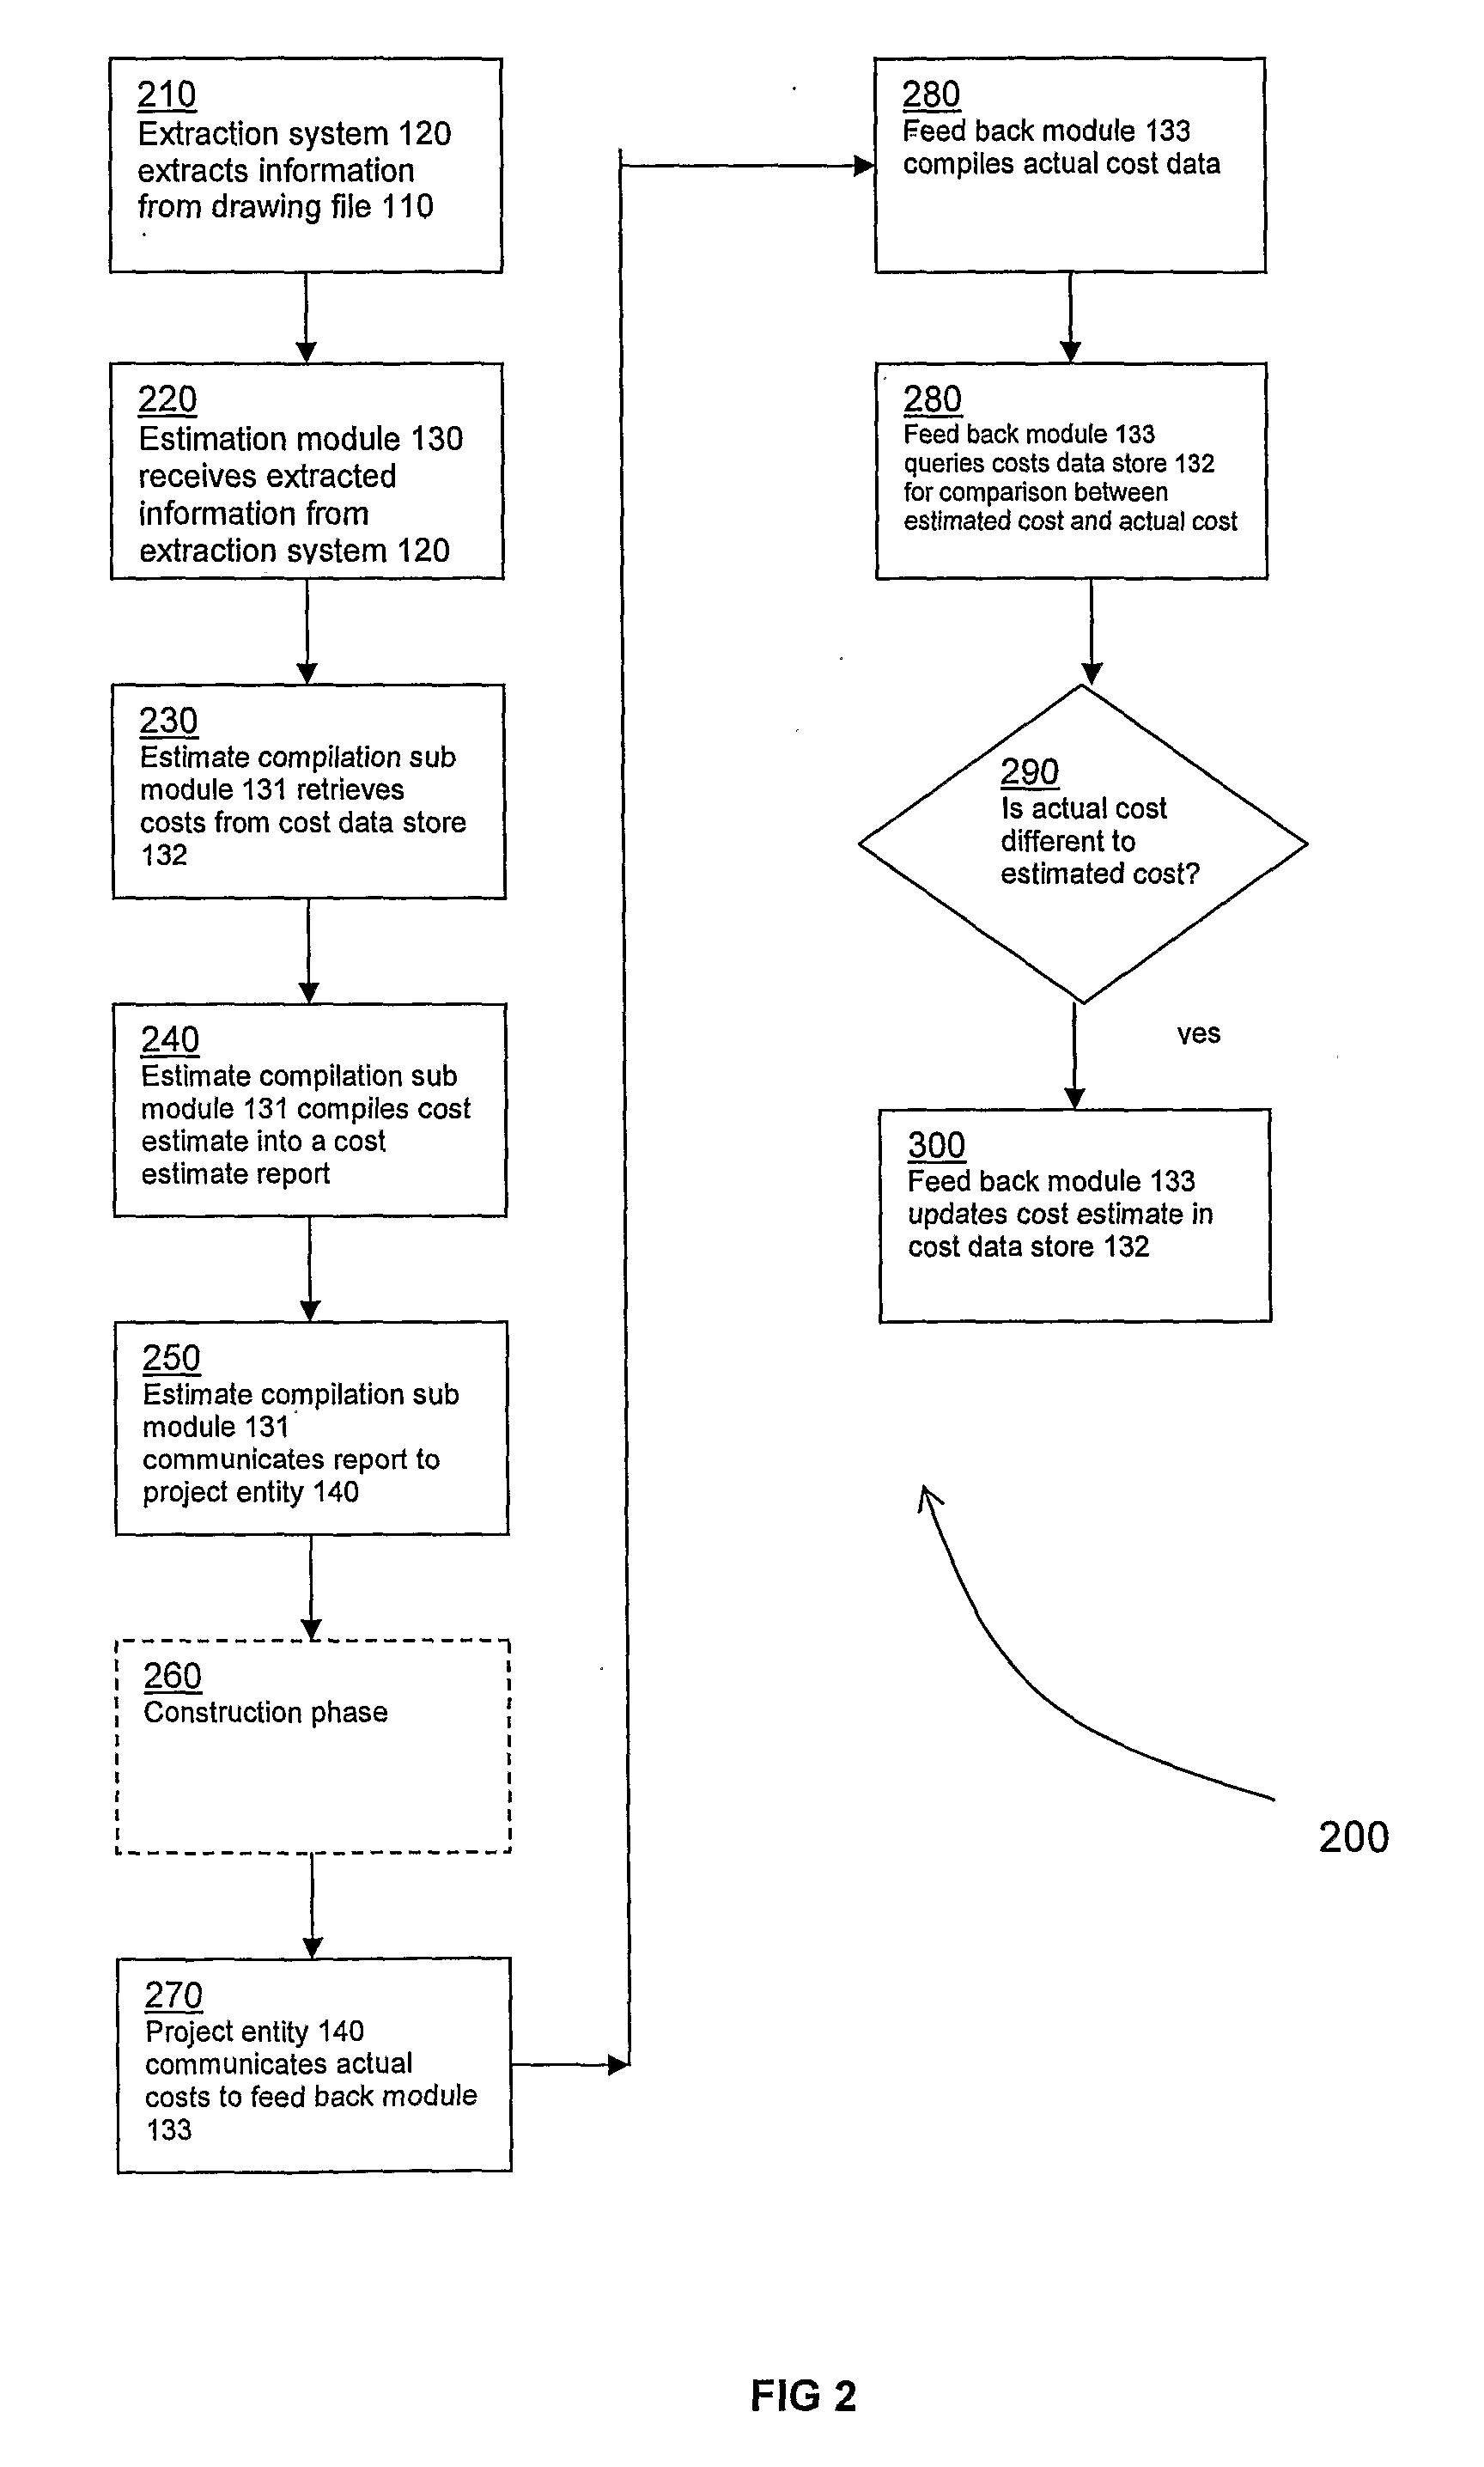 Method and System for Estimating Project Costs